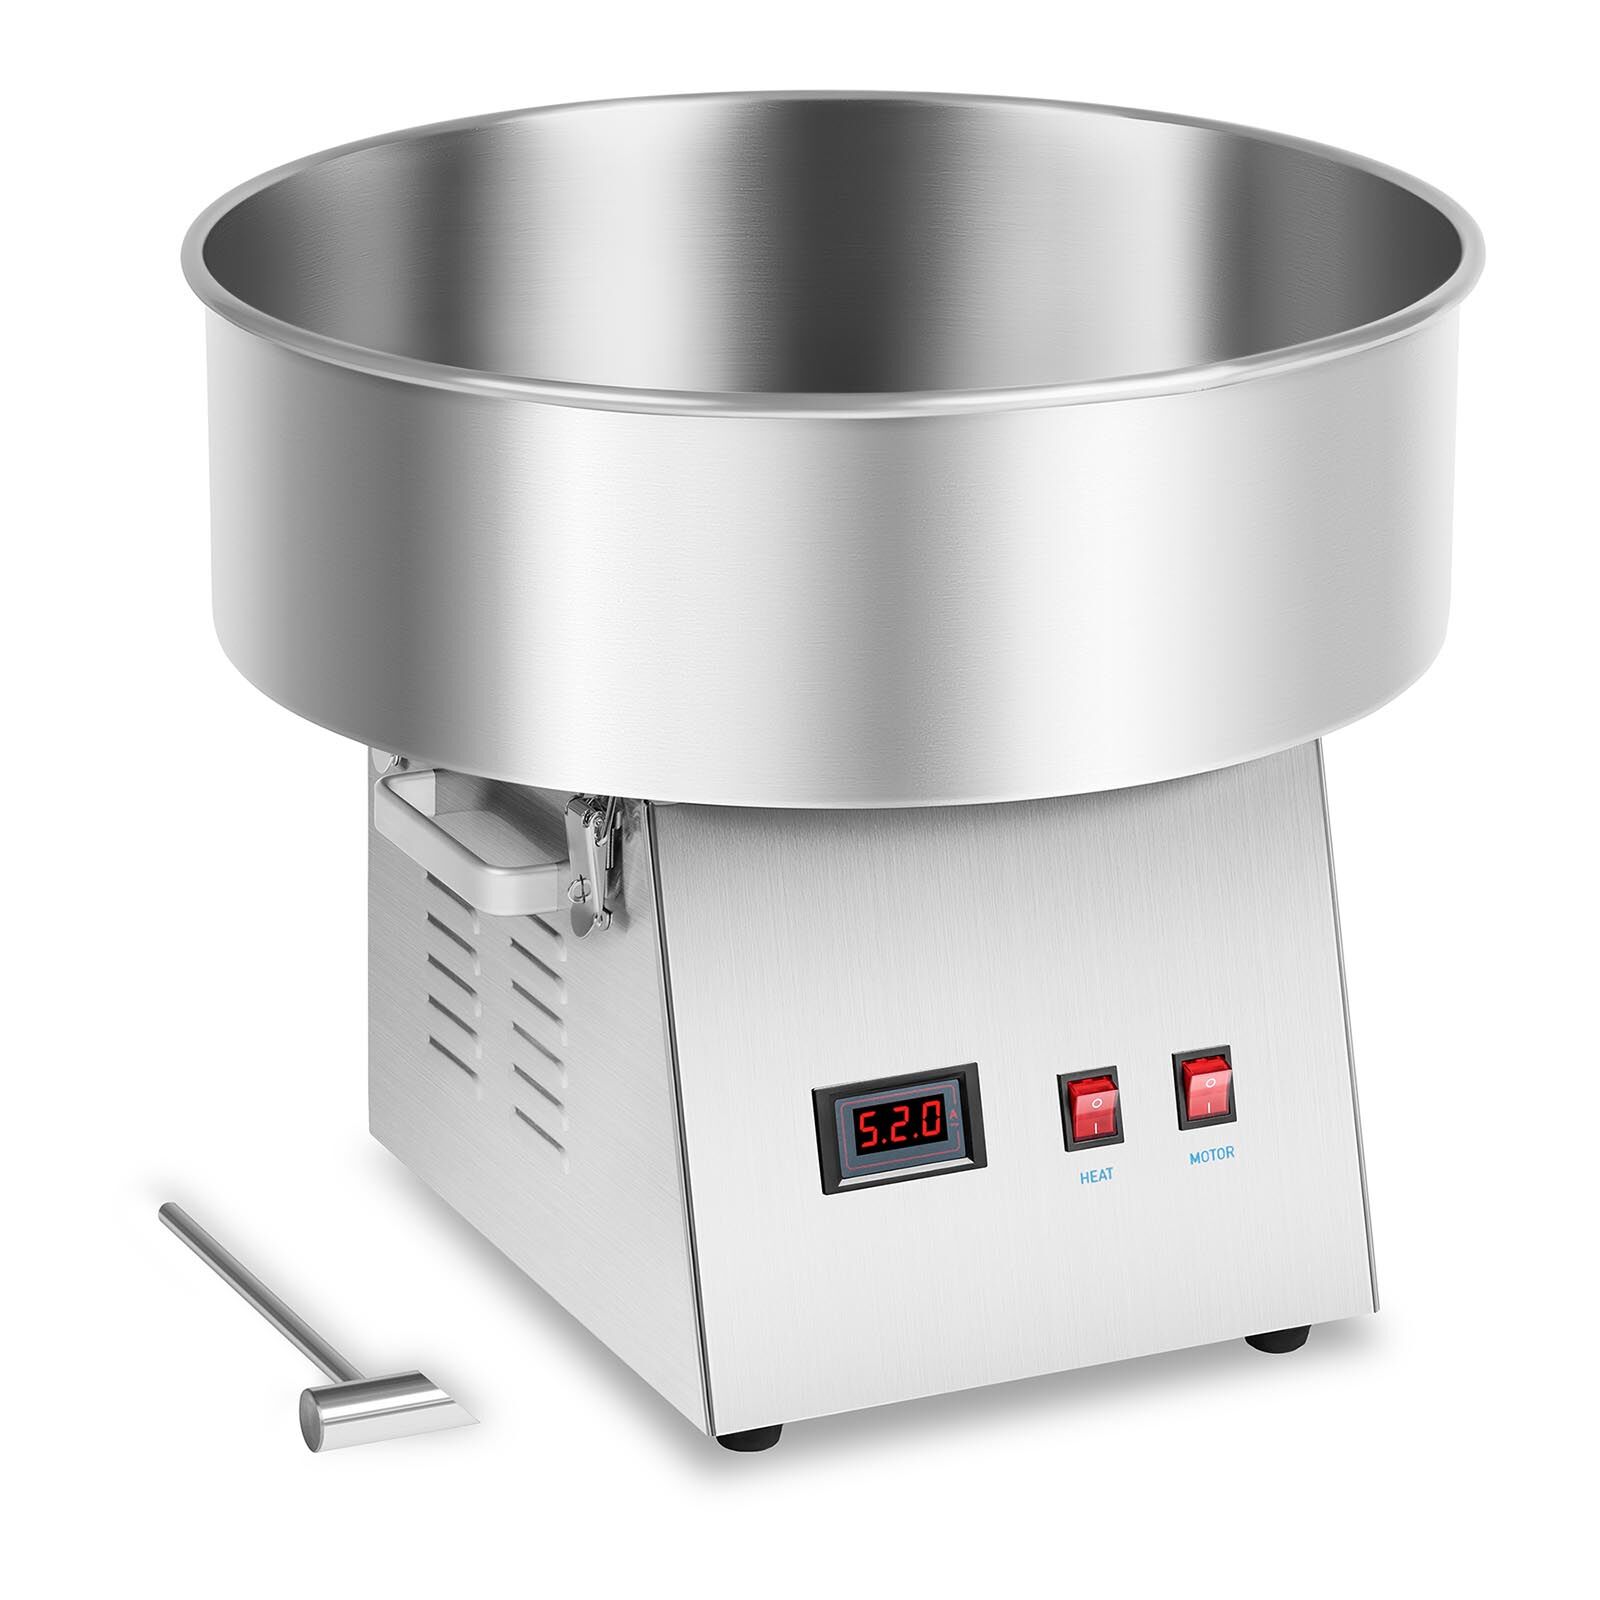 Royal Catering Candy Floss Machine - 52 cm - stainless steel - vibration absorption